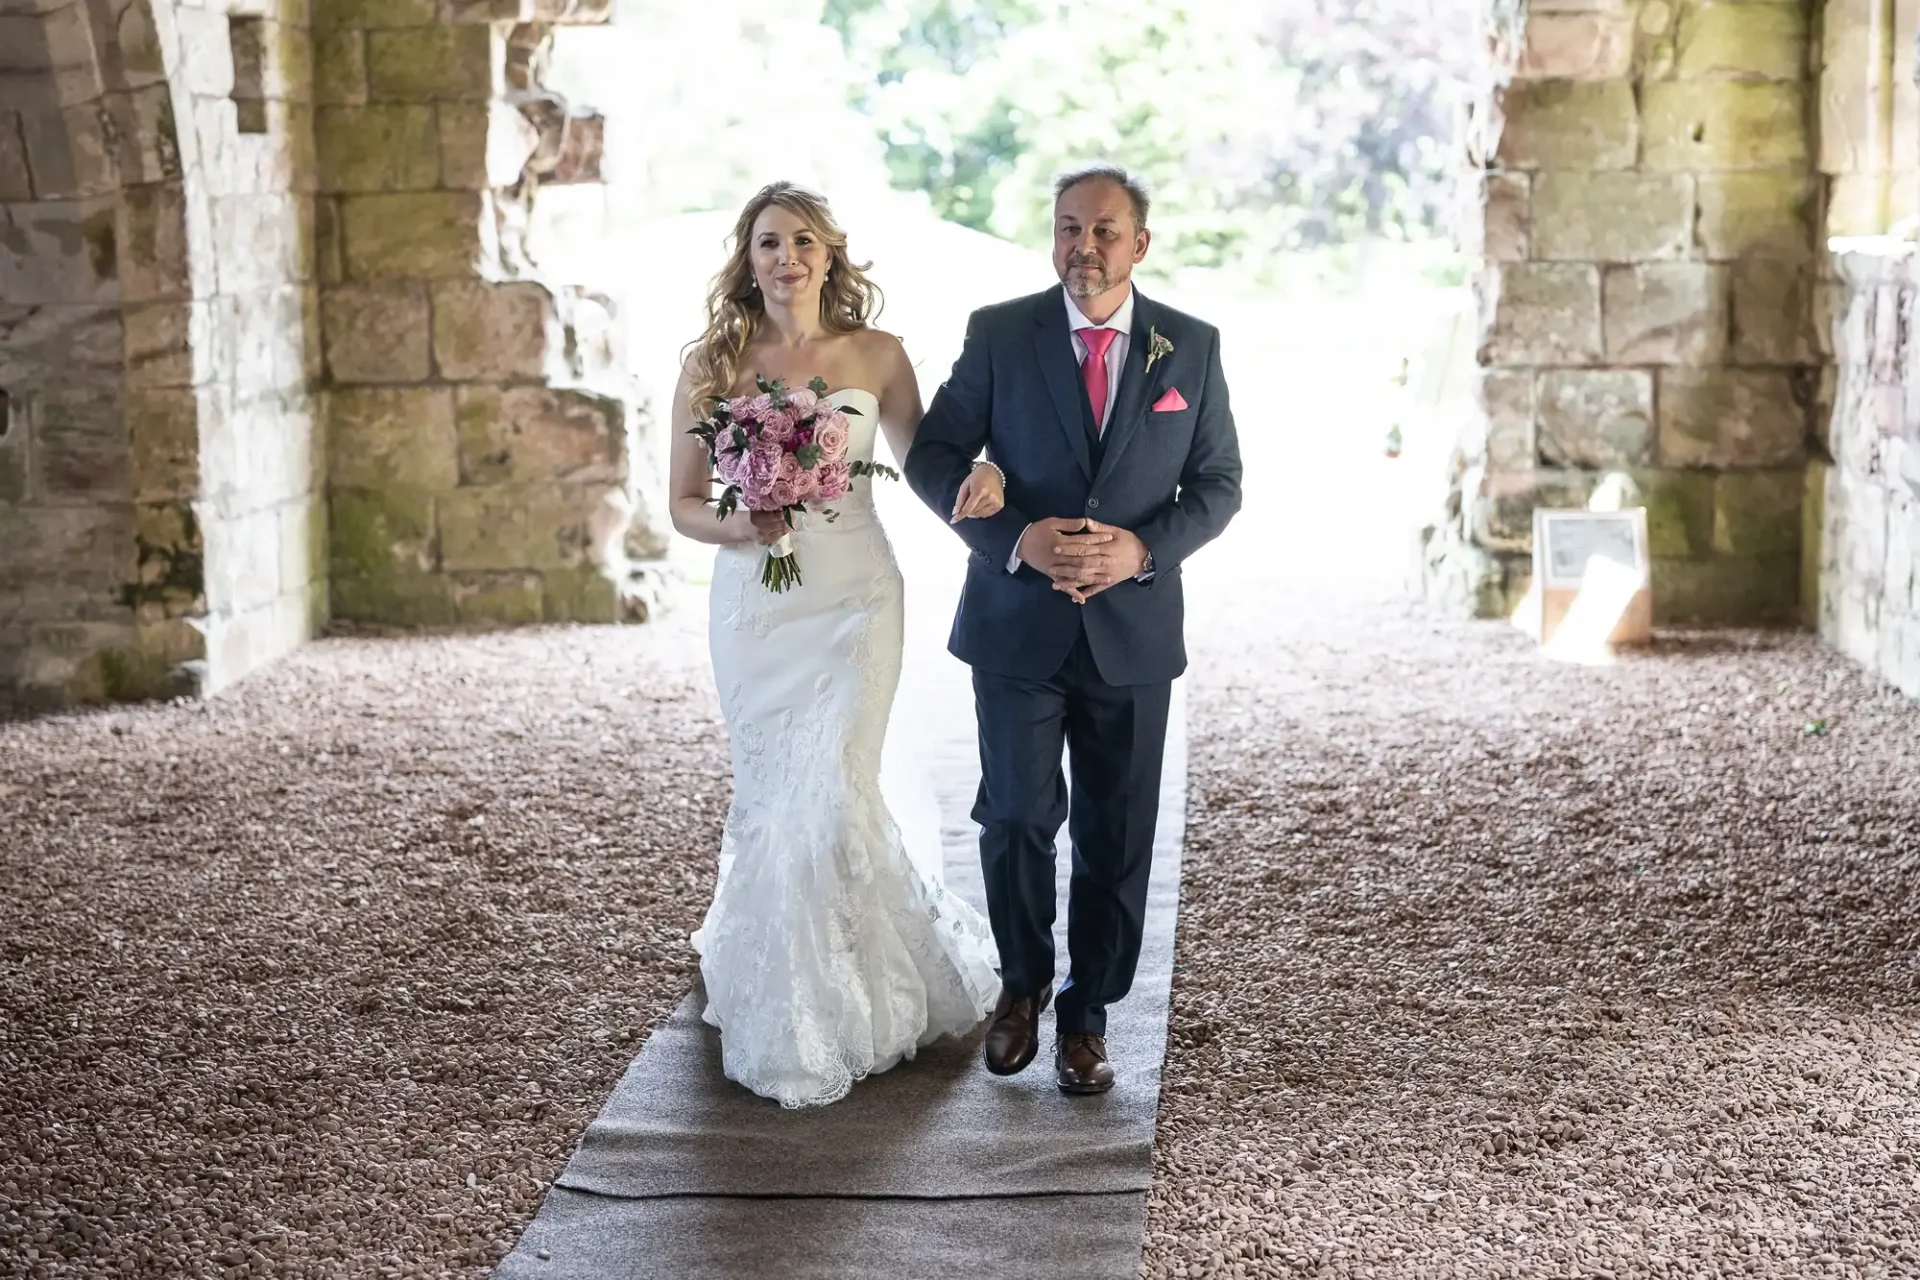 A bride in a white dress and a groom in a suit walk down the aisle together in a stone architecture setting, both smiling.